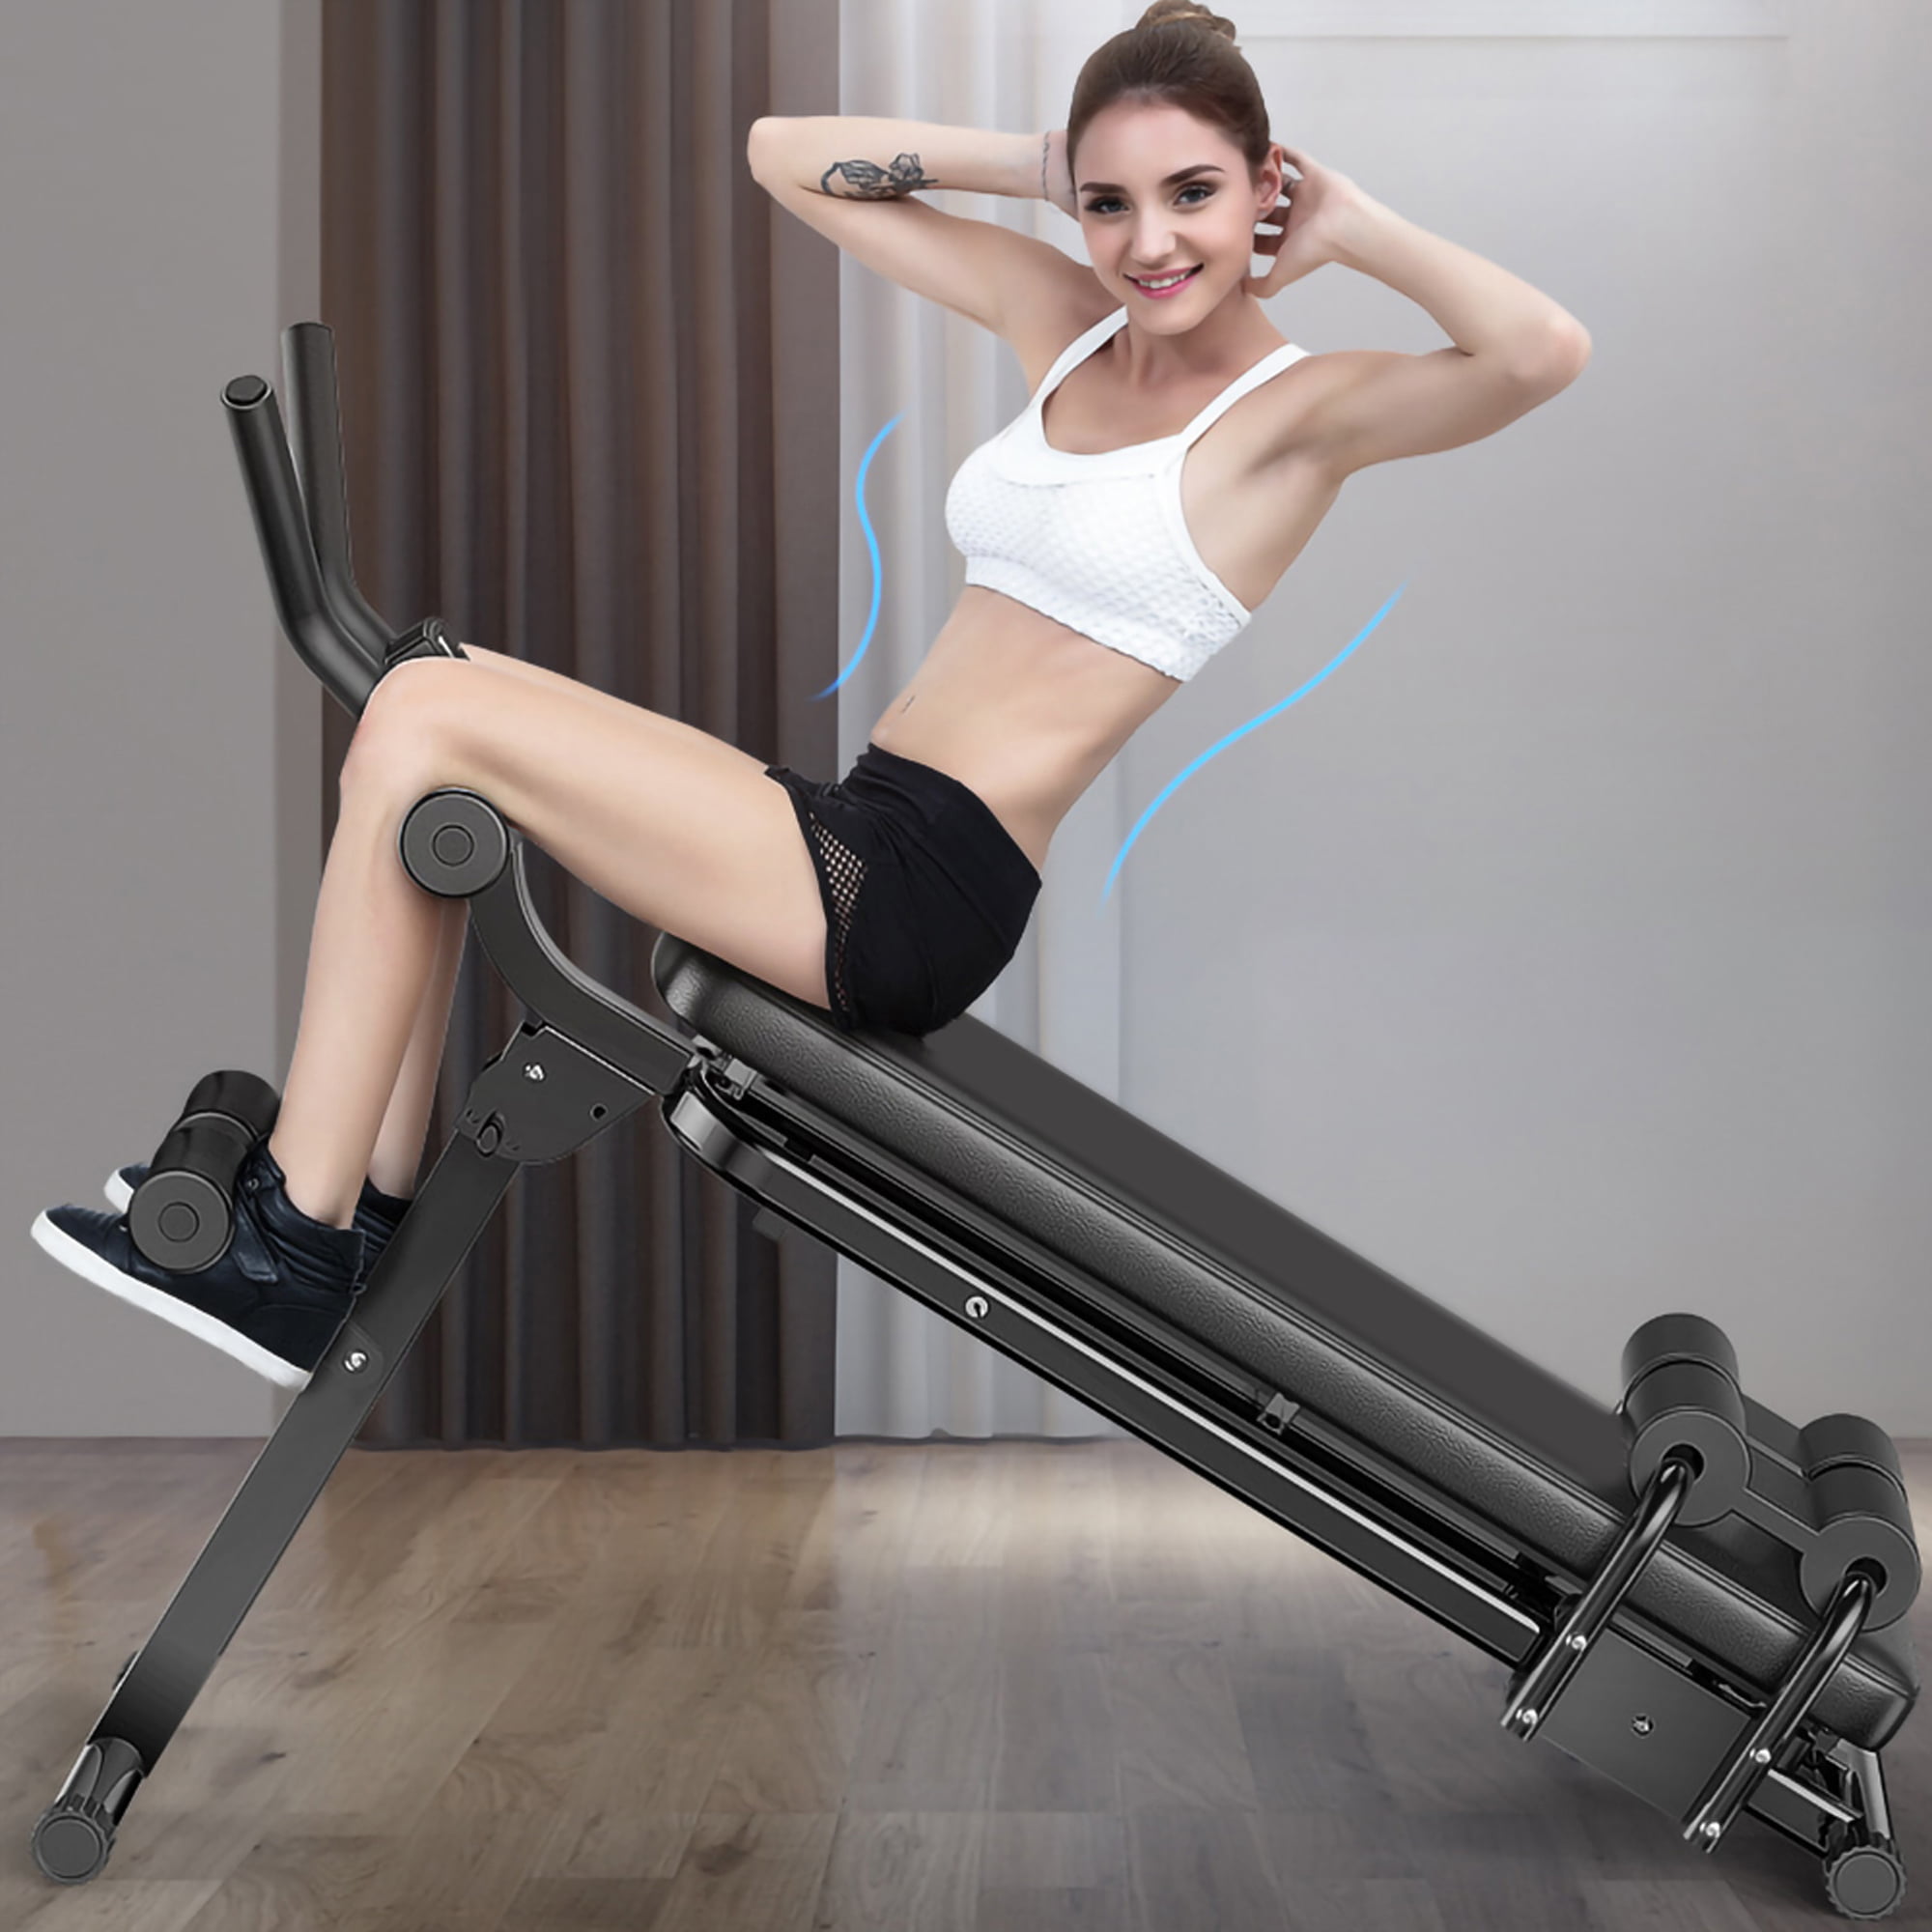 Gym Home Sit Up Abdominal Bench Fitness Machine For Training Exercise 